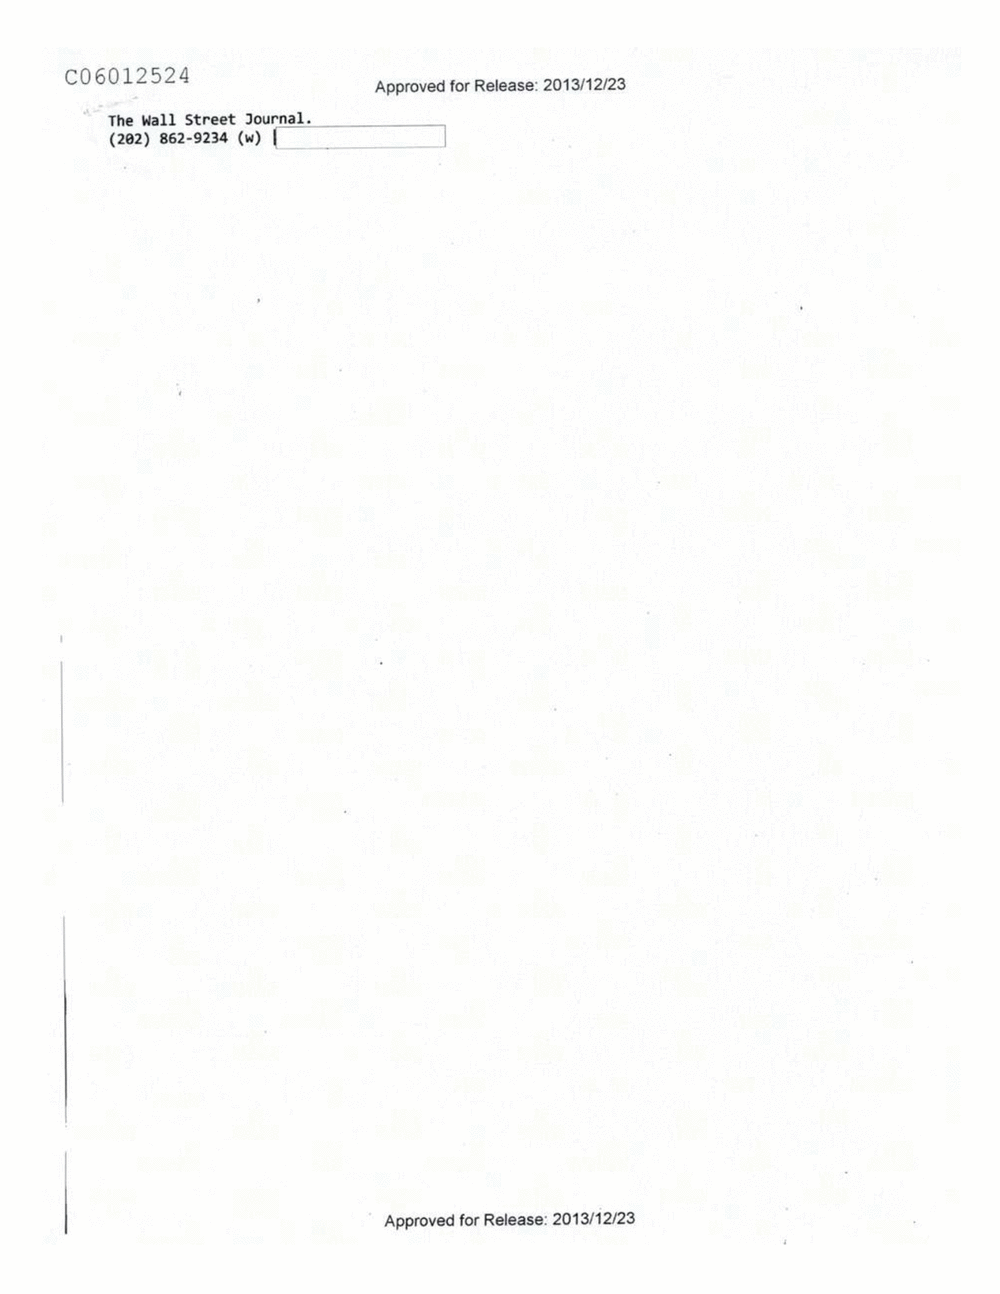 Page 47 from Email Correspondence Between Reporters and CIA Flacks